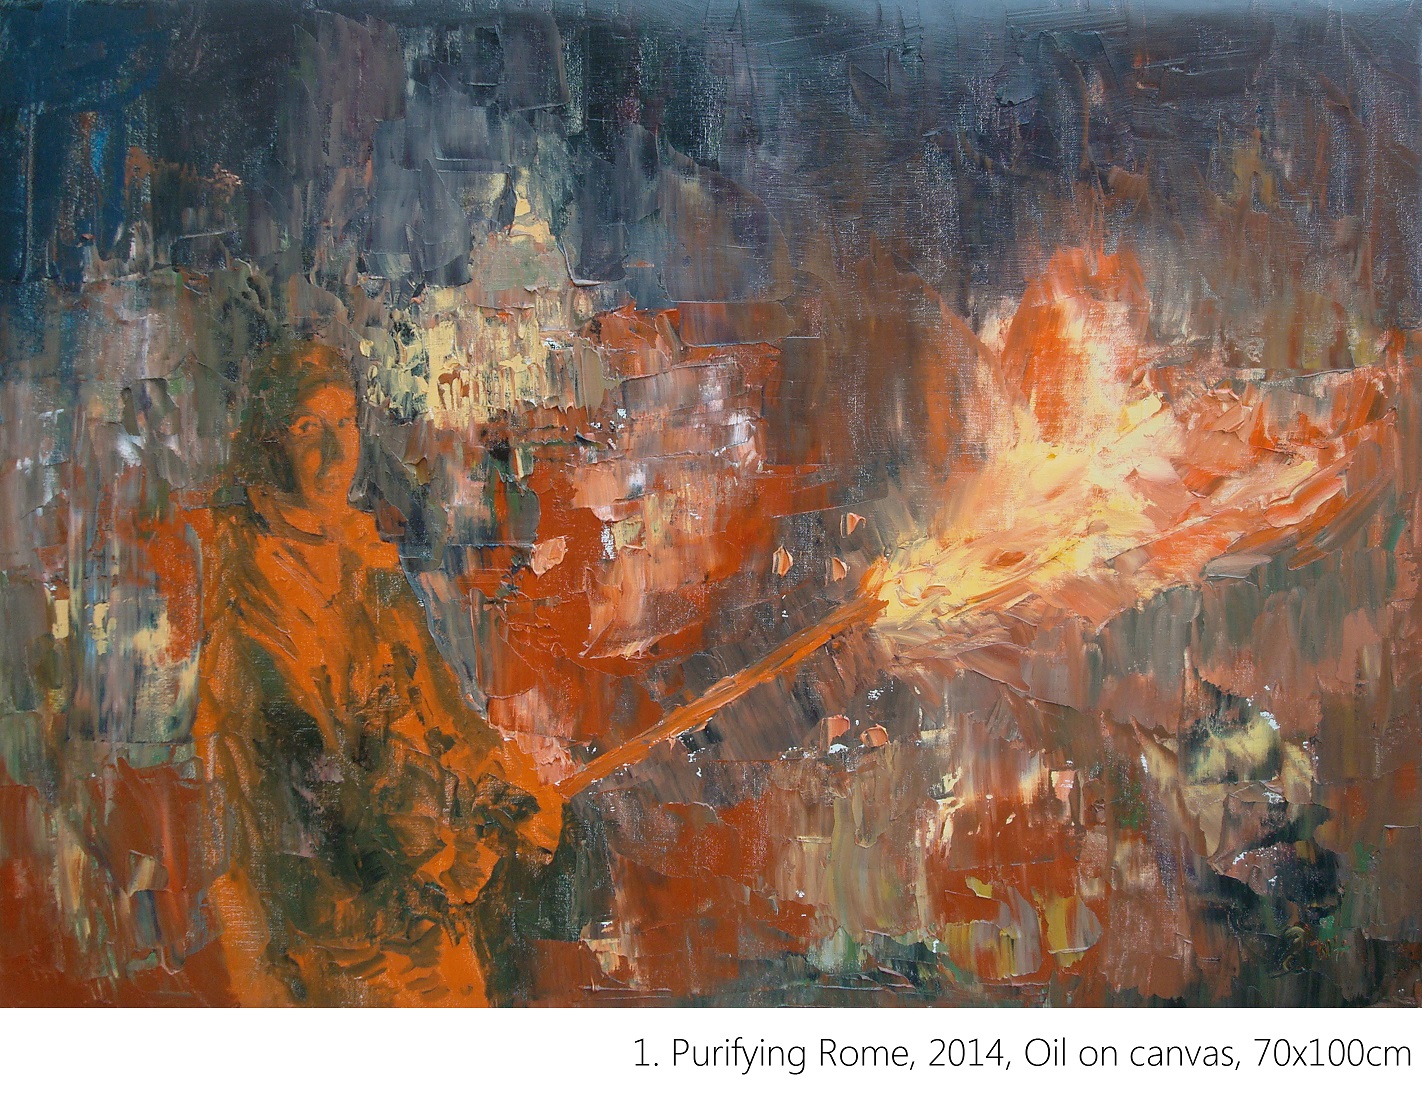 1. Purifying Rome, 2014, Oil on canvas, 70x100cm